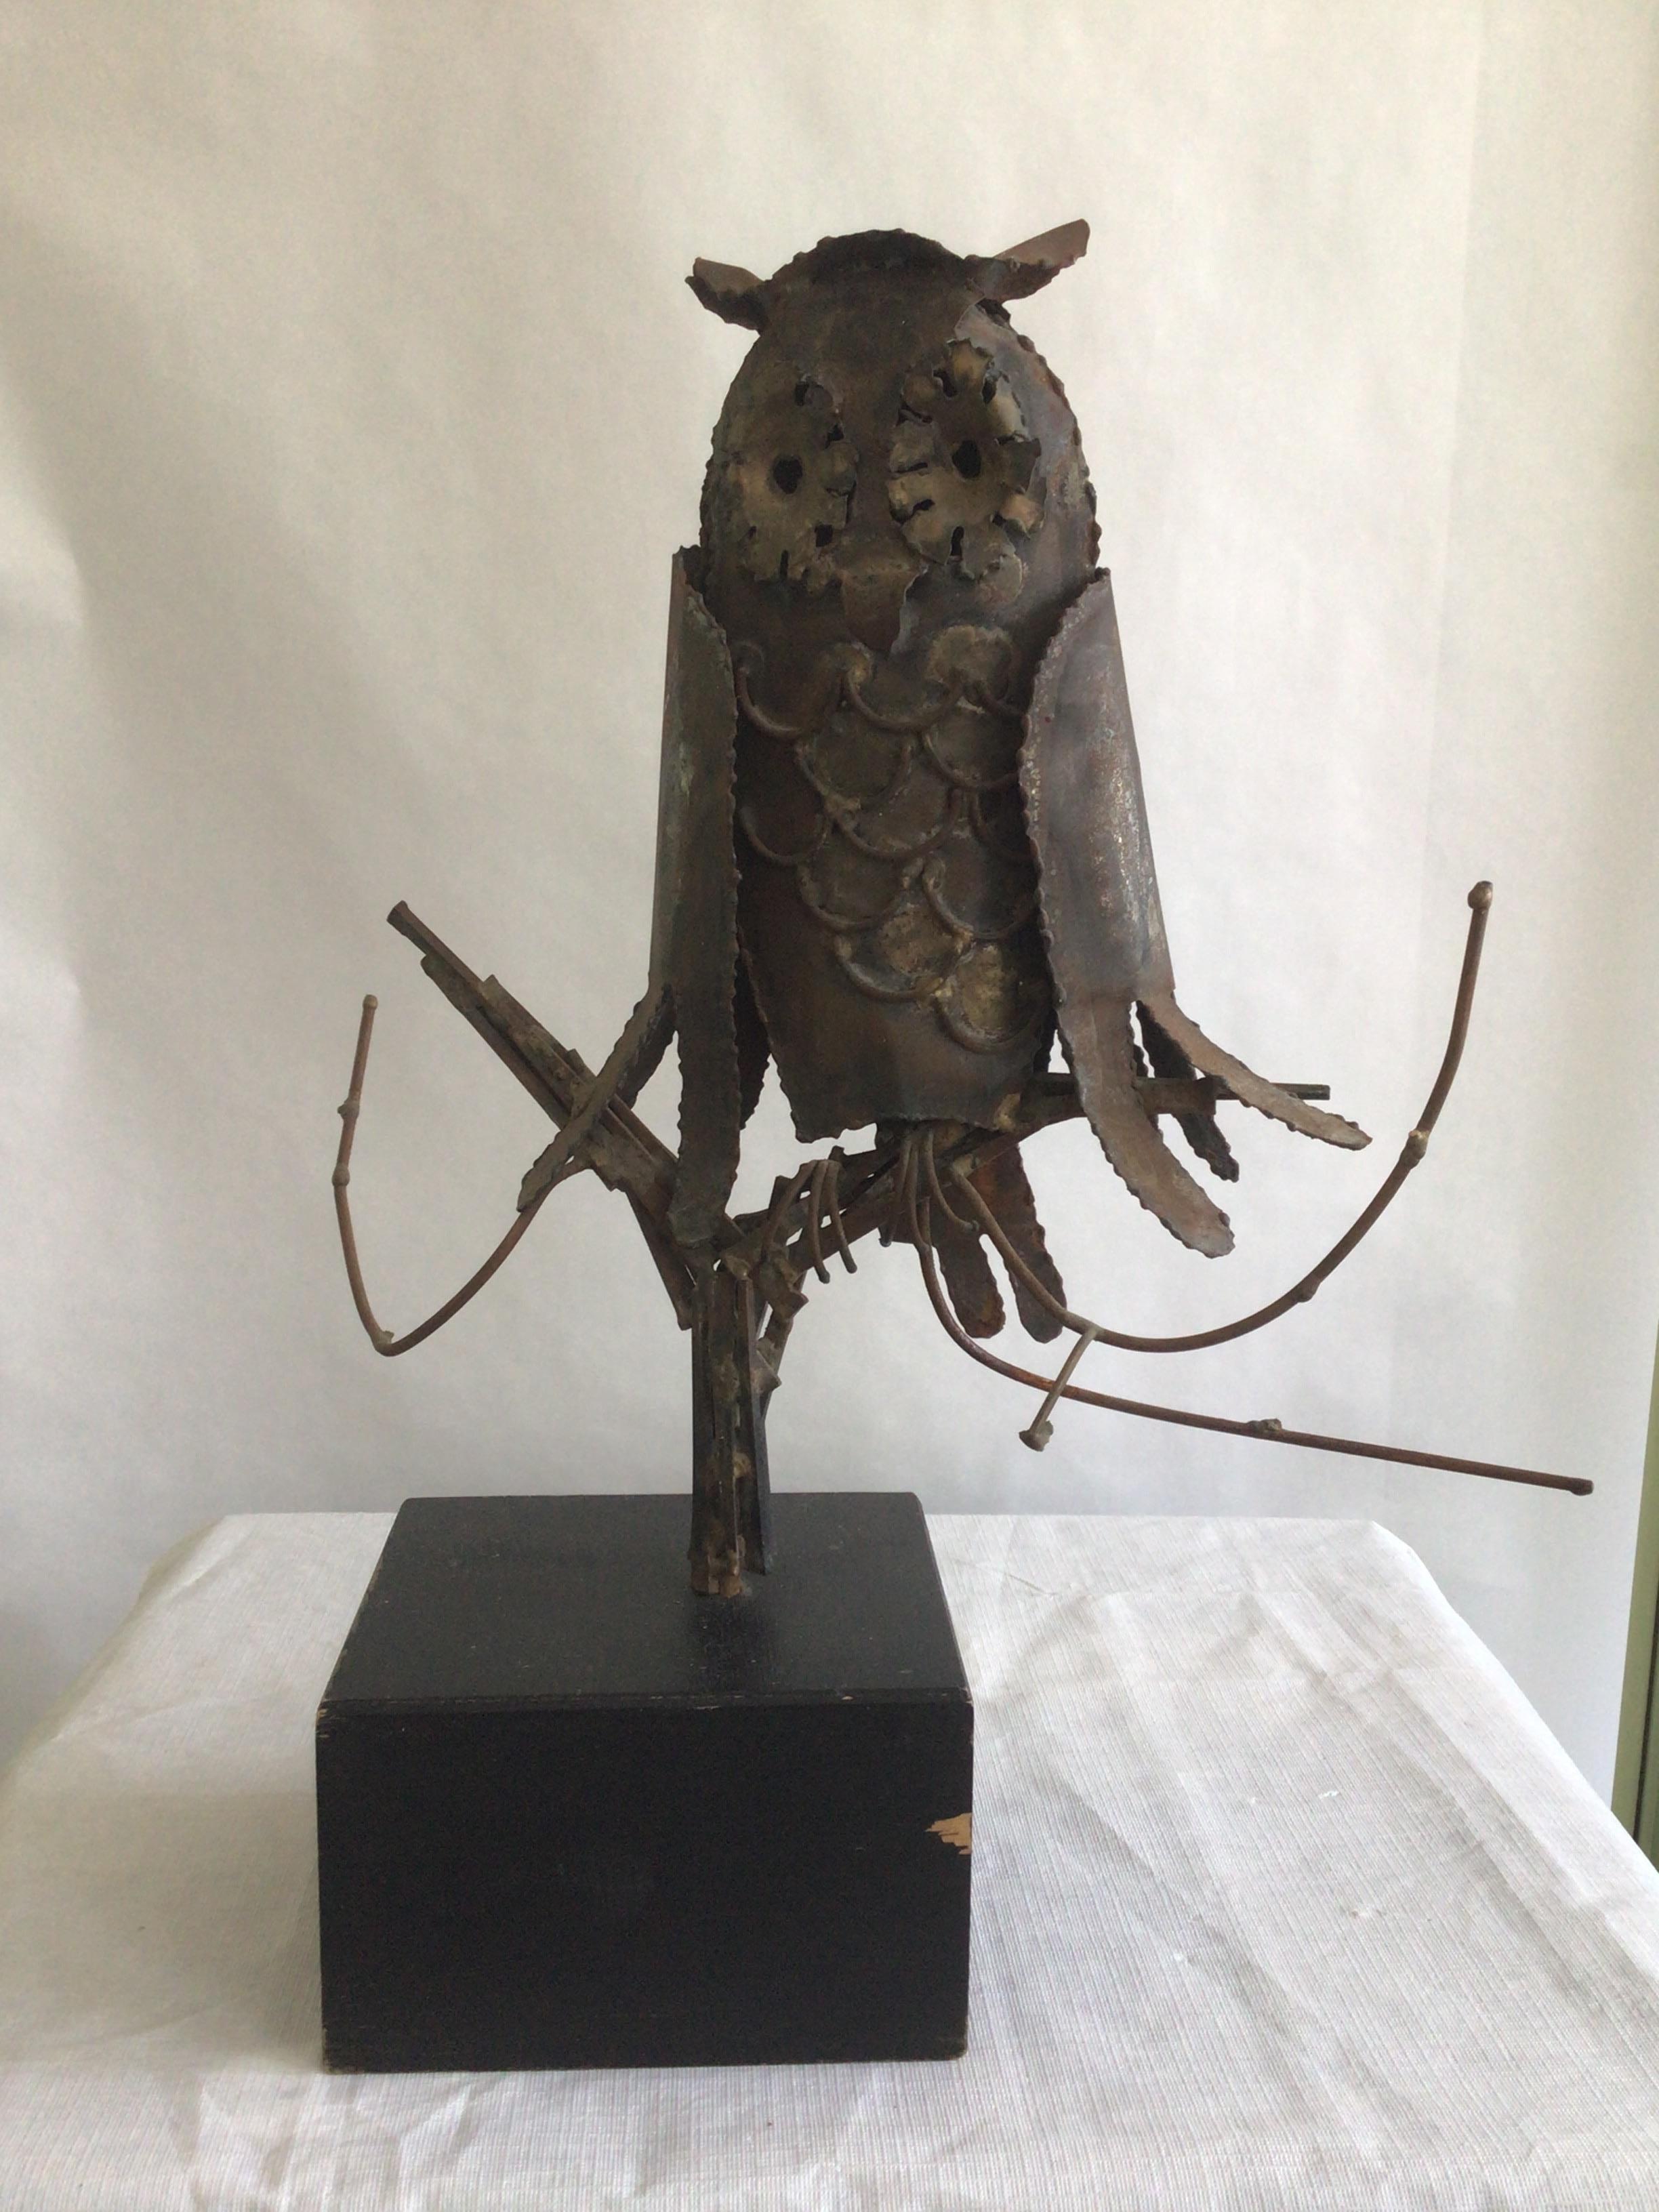 1960s Owl Sculpture On A Painted Black Base
Willem DeGroot Style
Wood Base has some wear